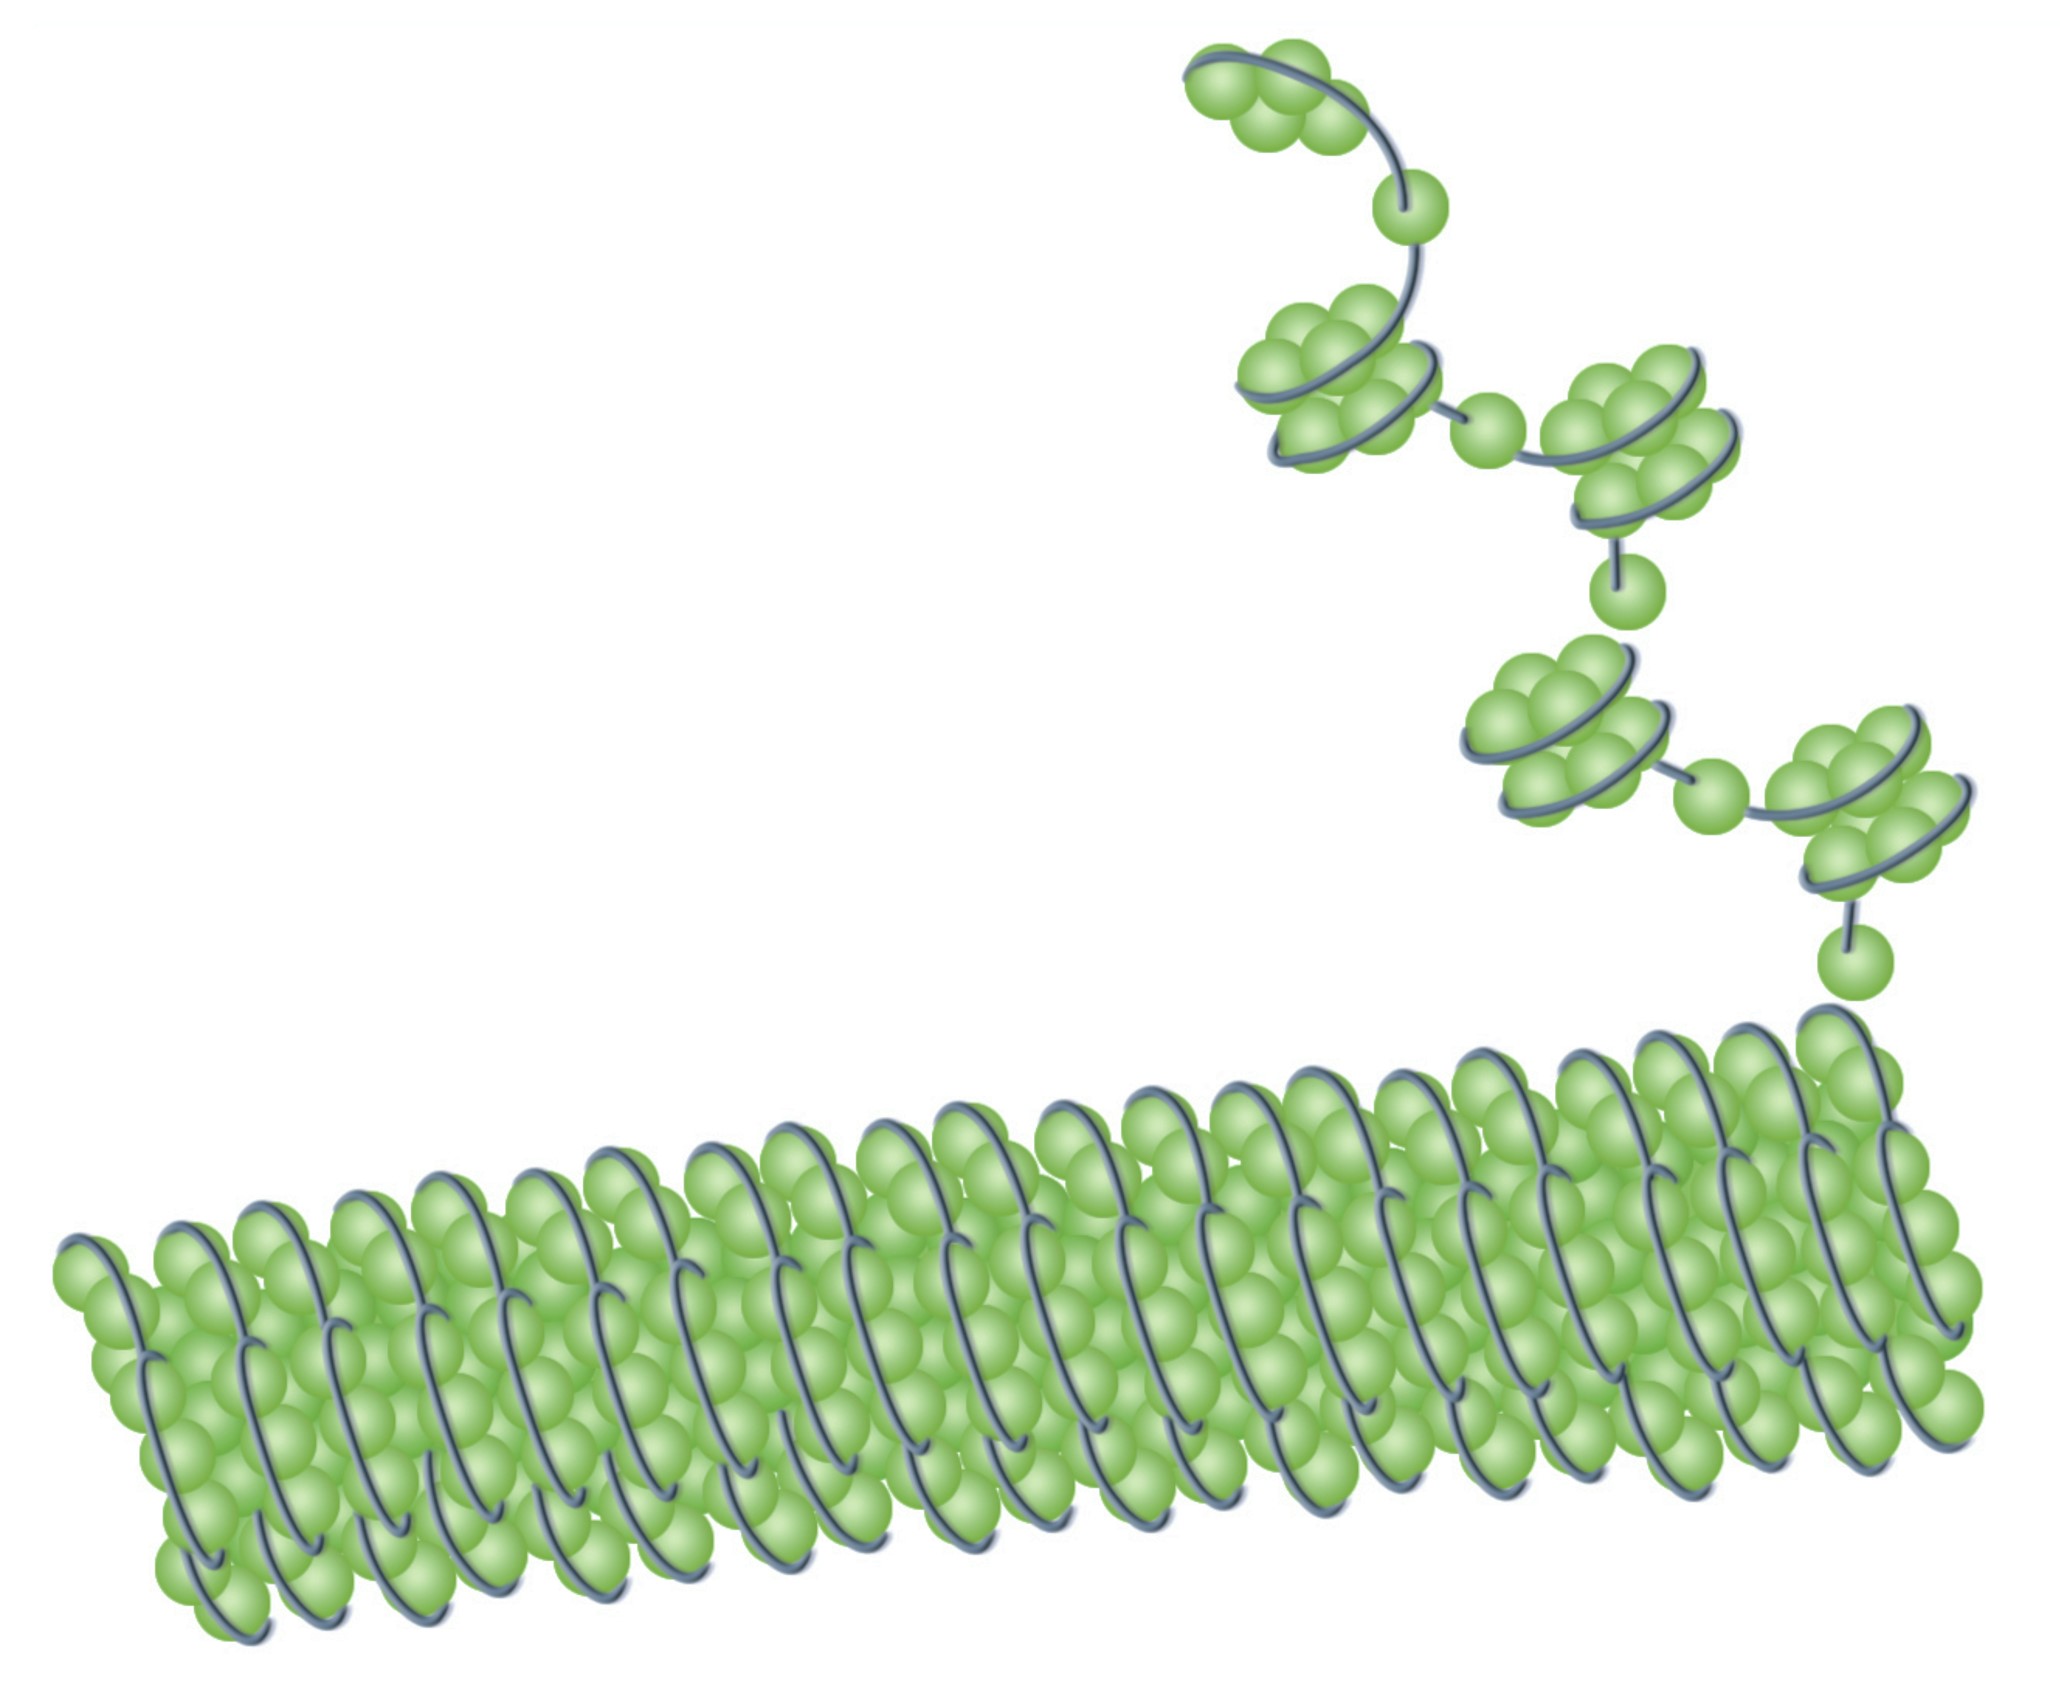 A dark green strand representing DNA wound around bright green beads of histones tightly packed like a string to form chromatin.